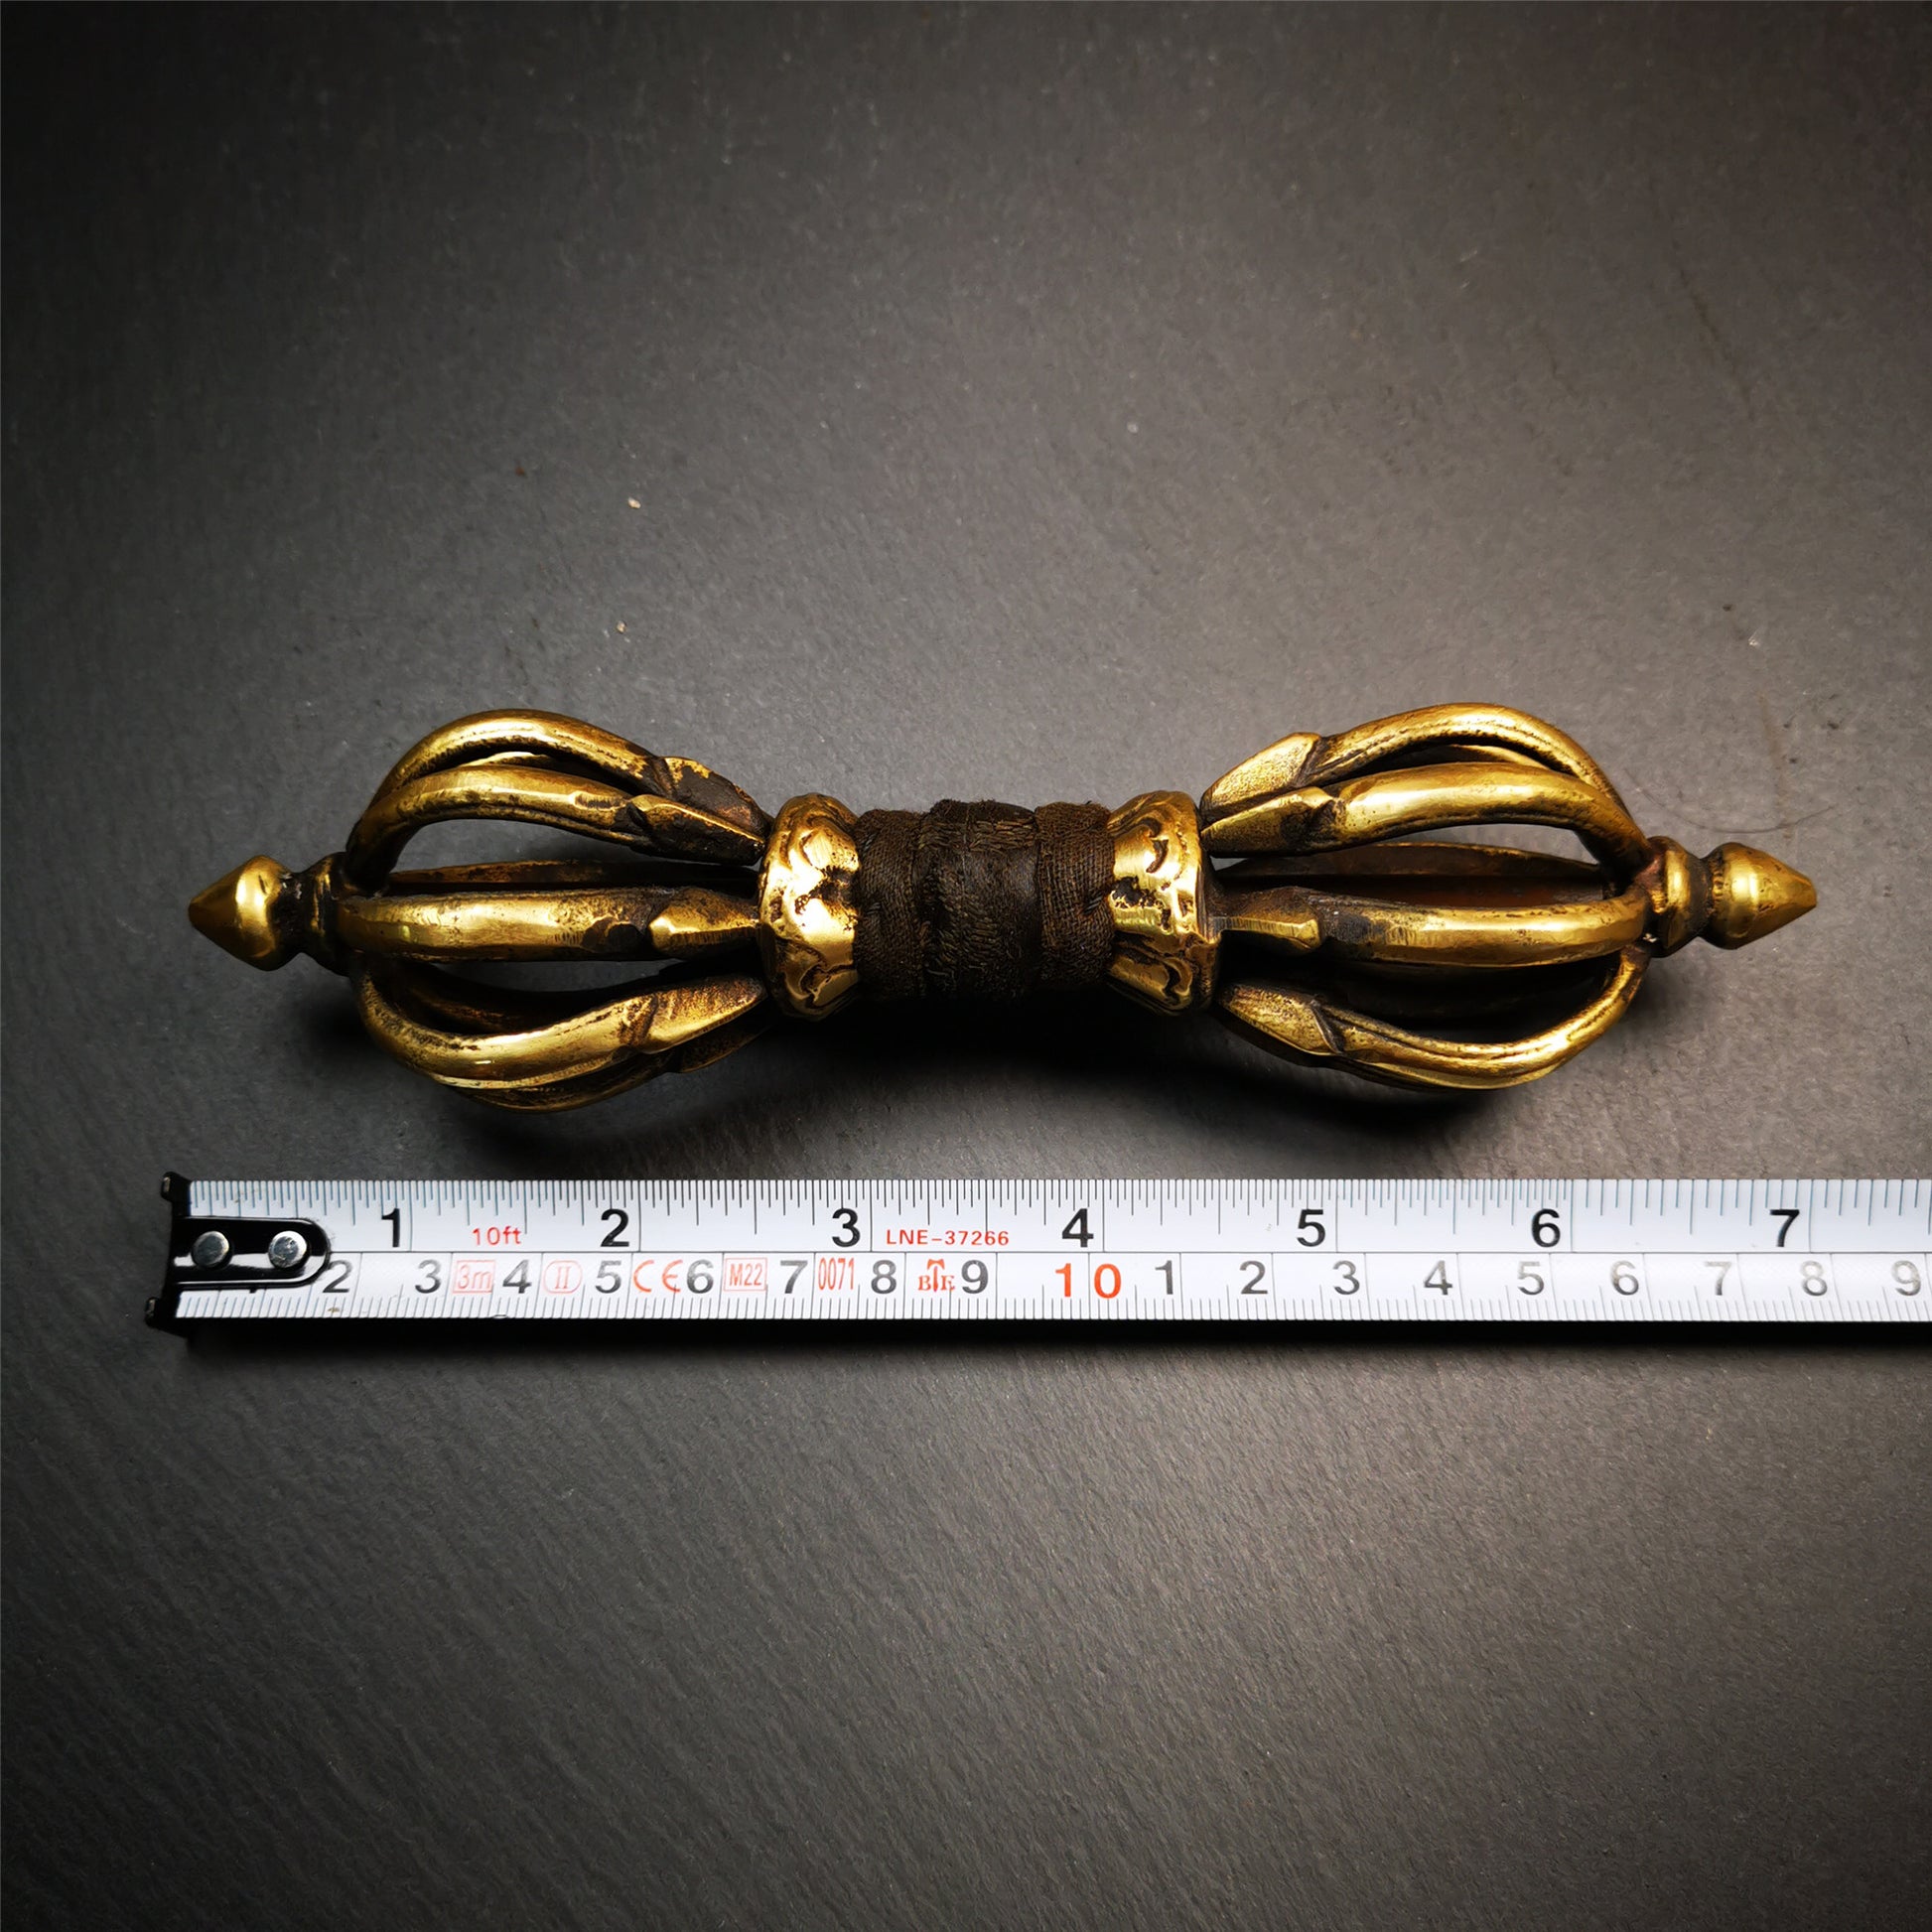 This vajra set was handmade in Nepal,using traditional techniques and materials. The Nine-pronged vajra is made of brass, and the outer box is made of wood,carved with the Tibetan letter of three karmas of word, thought , and deed The vajra can be inserted into the top of the box